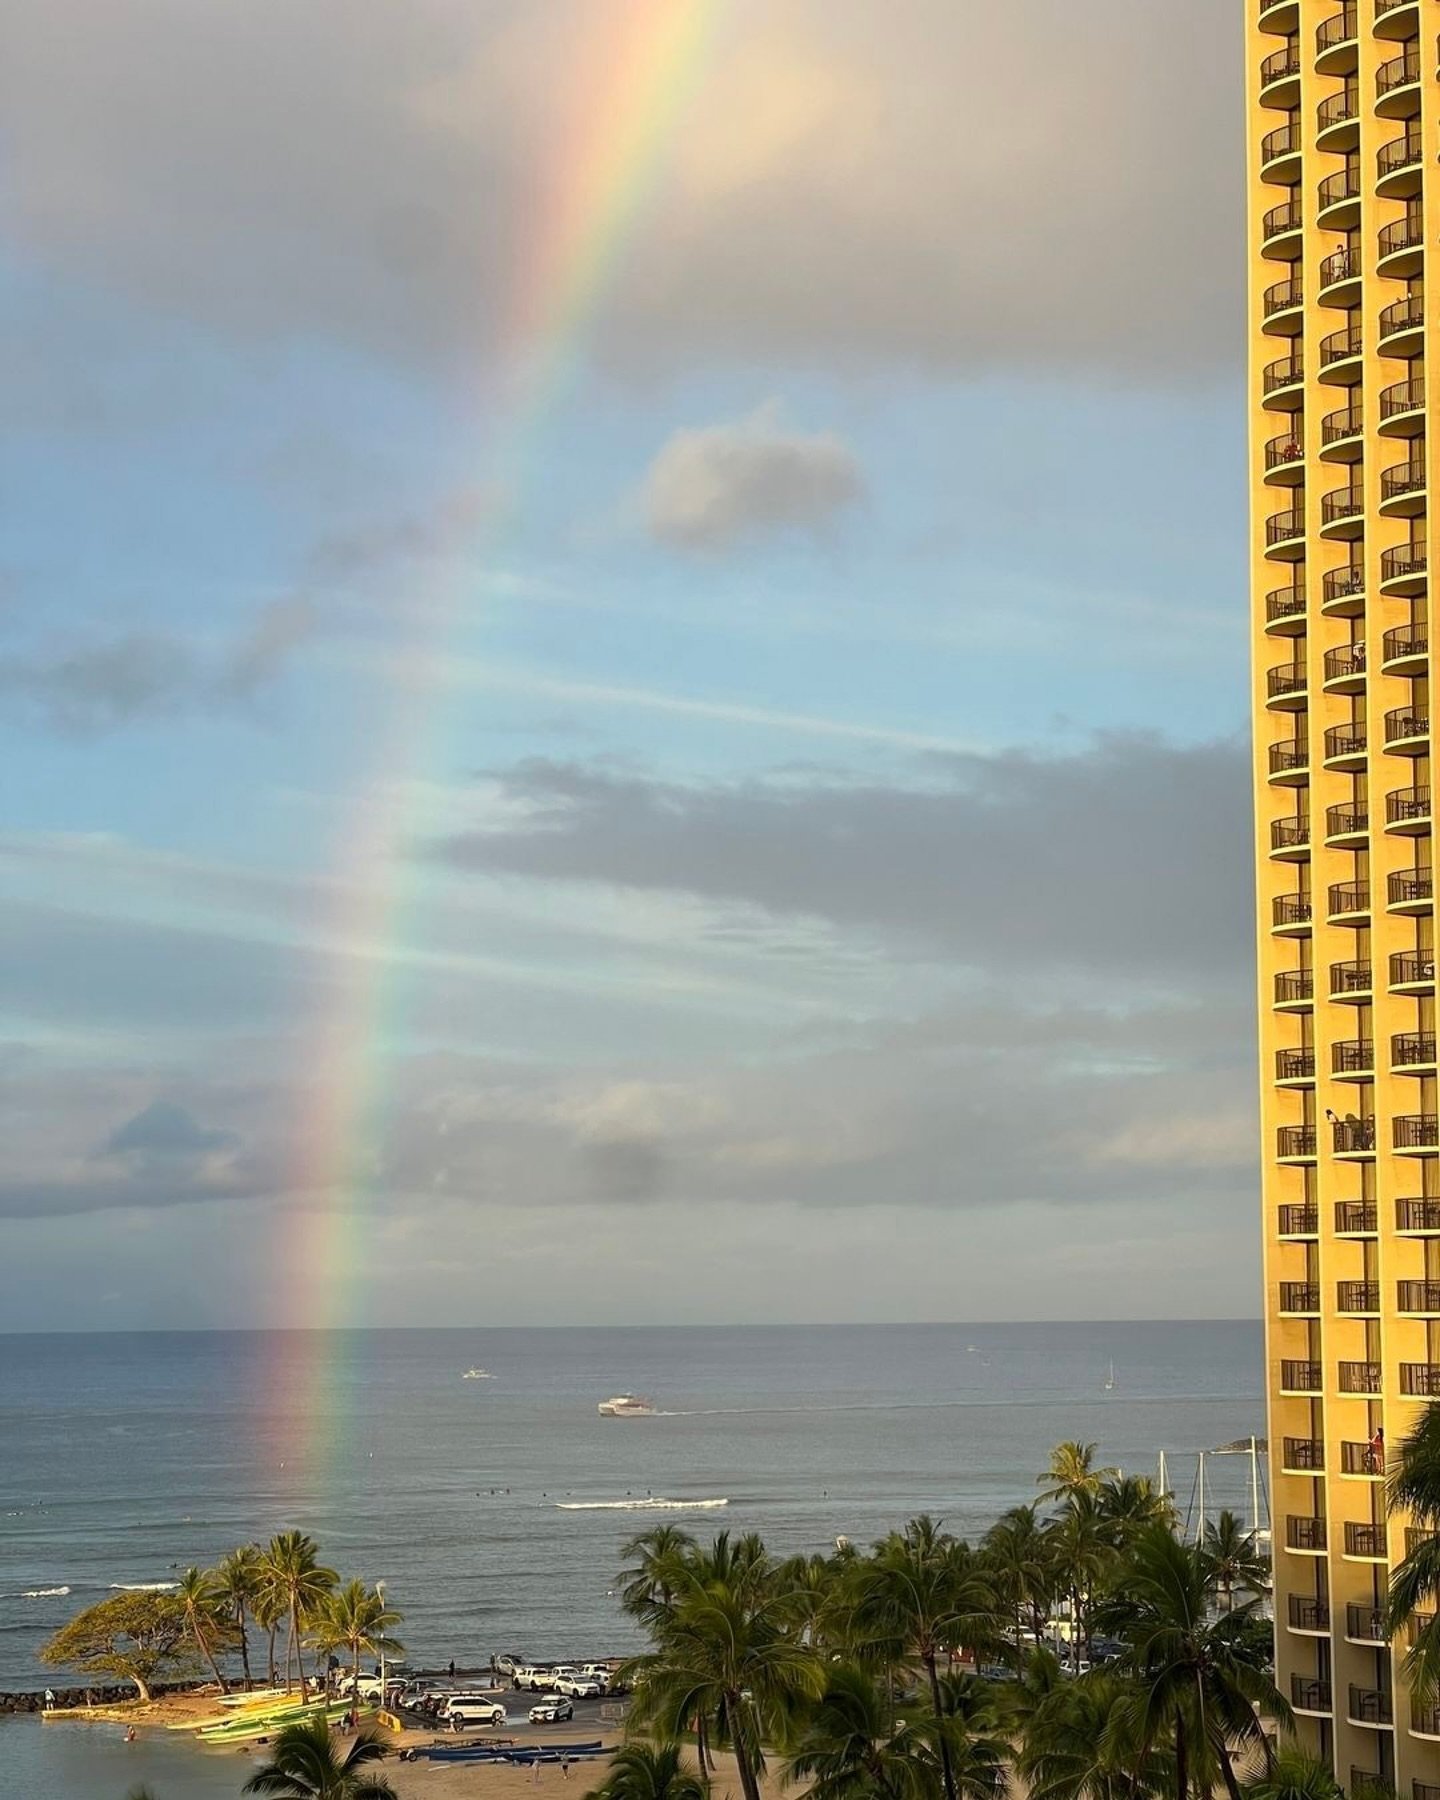 🌈 Views from the iconic Ilikai Hotel &amp; Luxury Suites. Don&rsquo;t forget to visit us on the top floor and enjoy the best all-day happy hour in Waikiki.

Book your reservations at pescawaikikibeach.com or call (808) 777-3100.

Repost from @ilikai